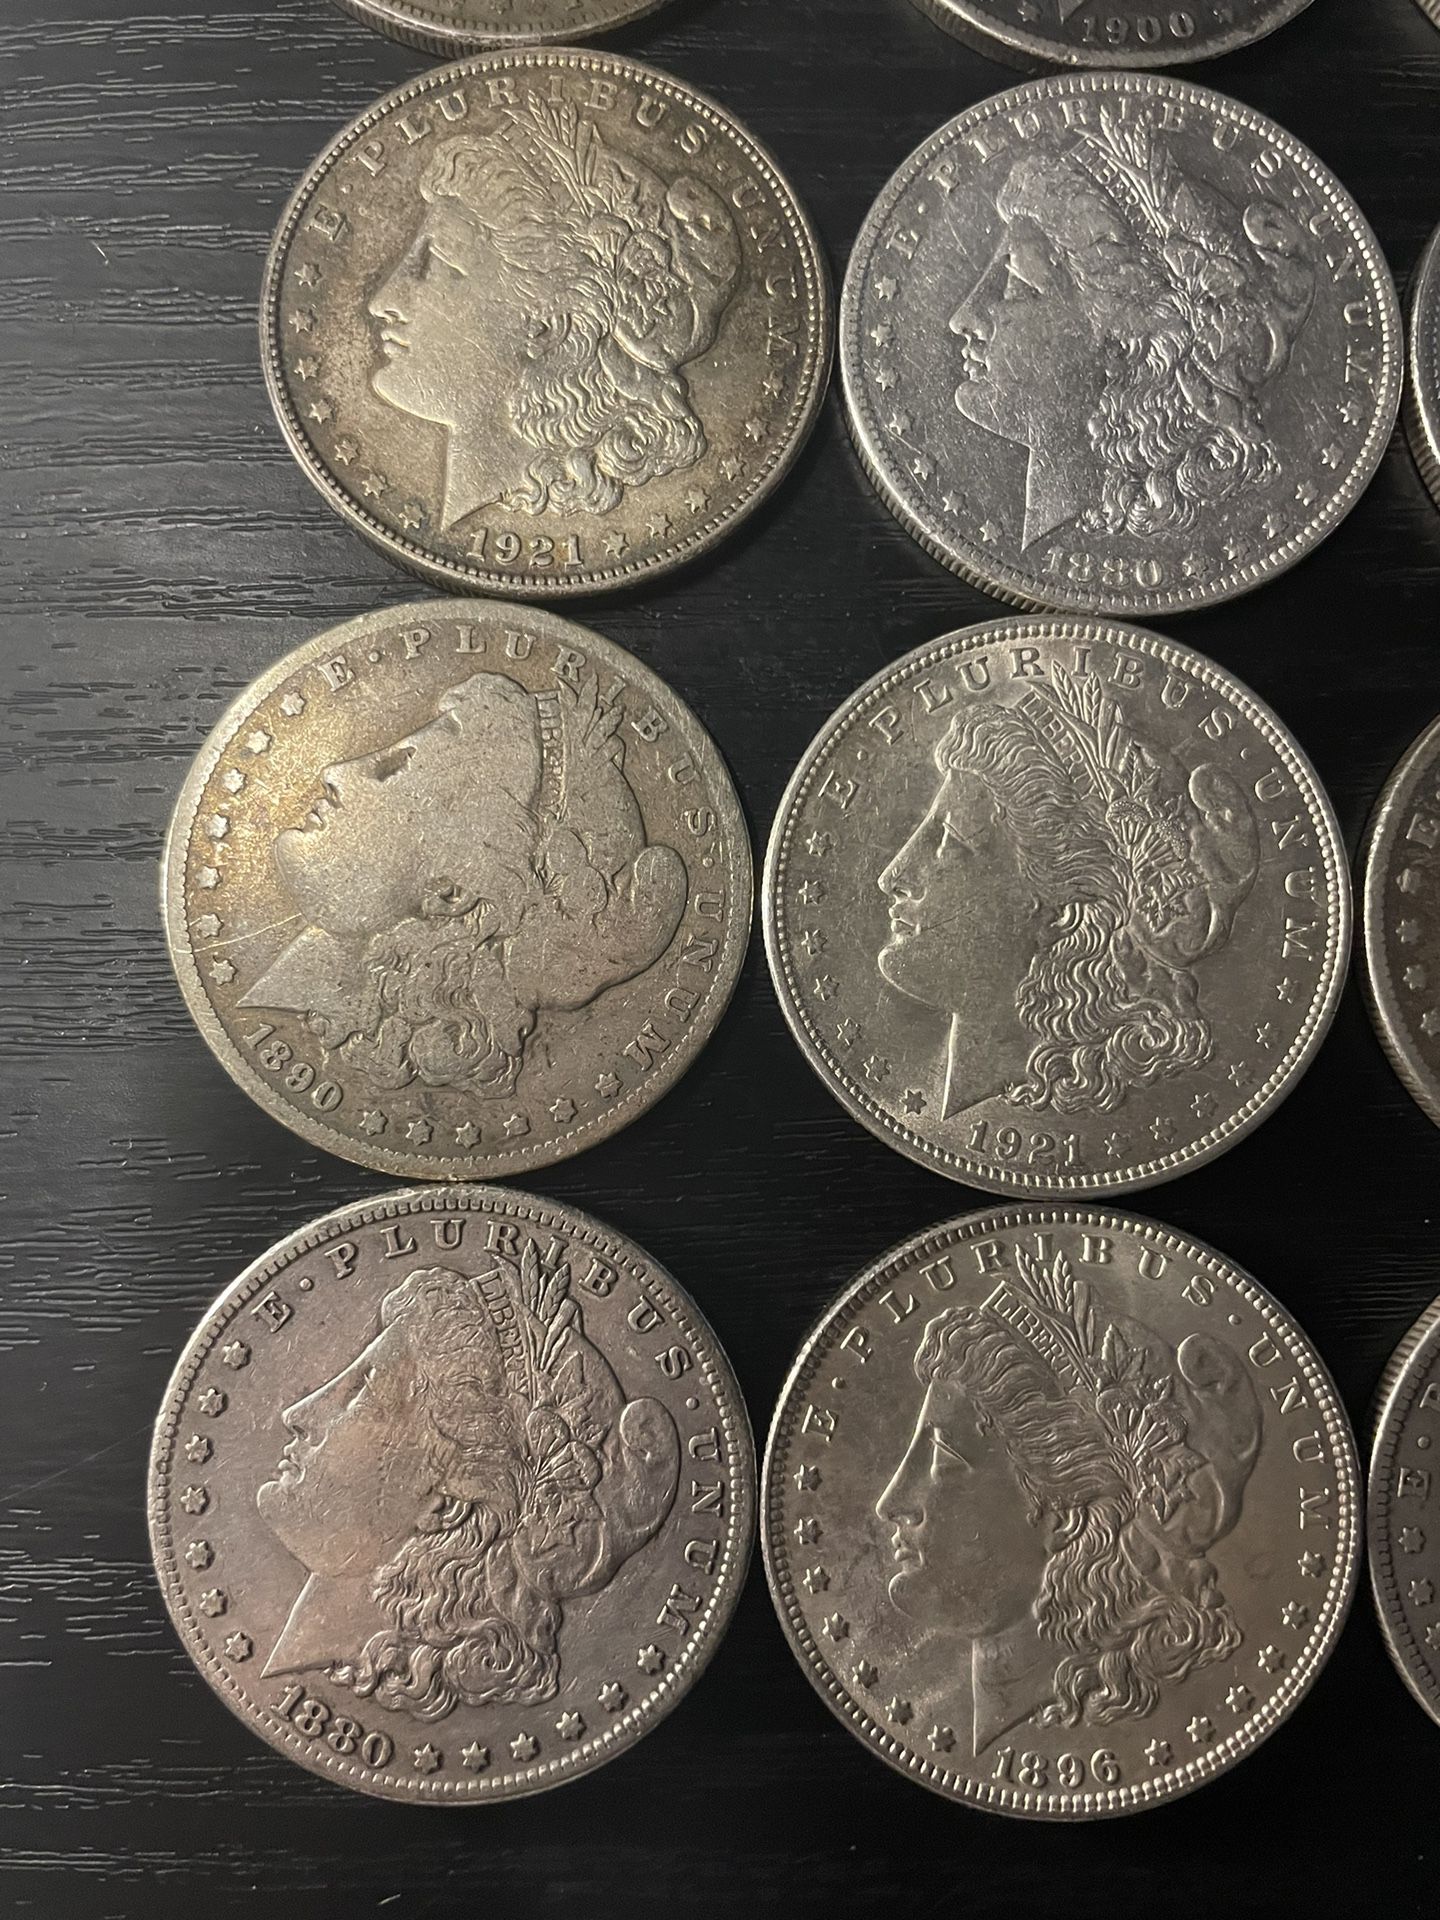 Lot And of 29 Morgan's Various Years, Mins and Condition A